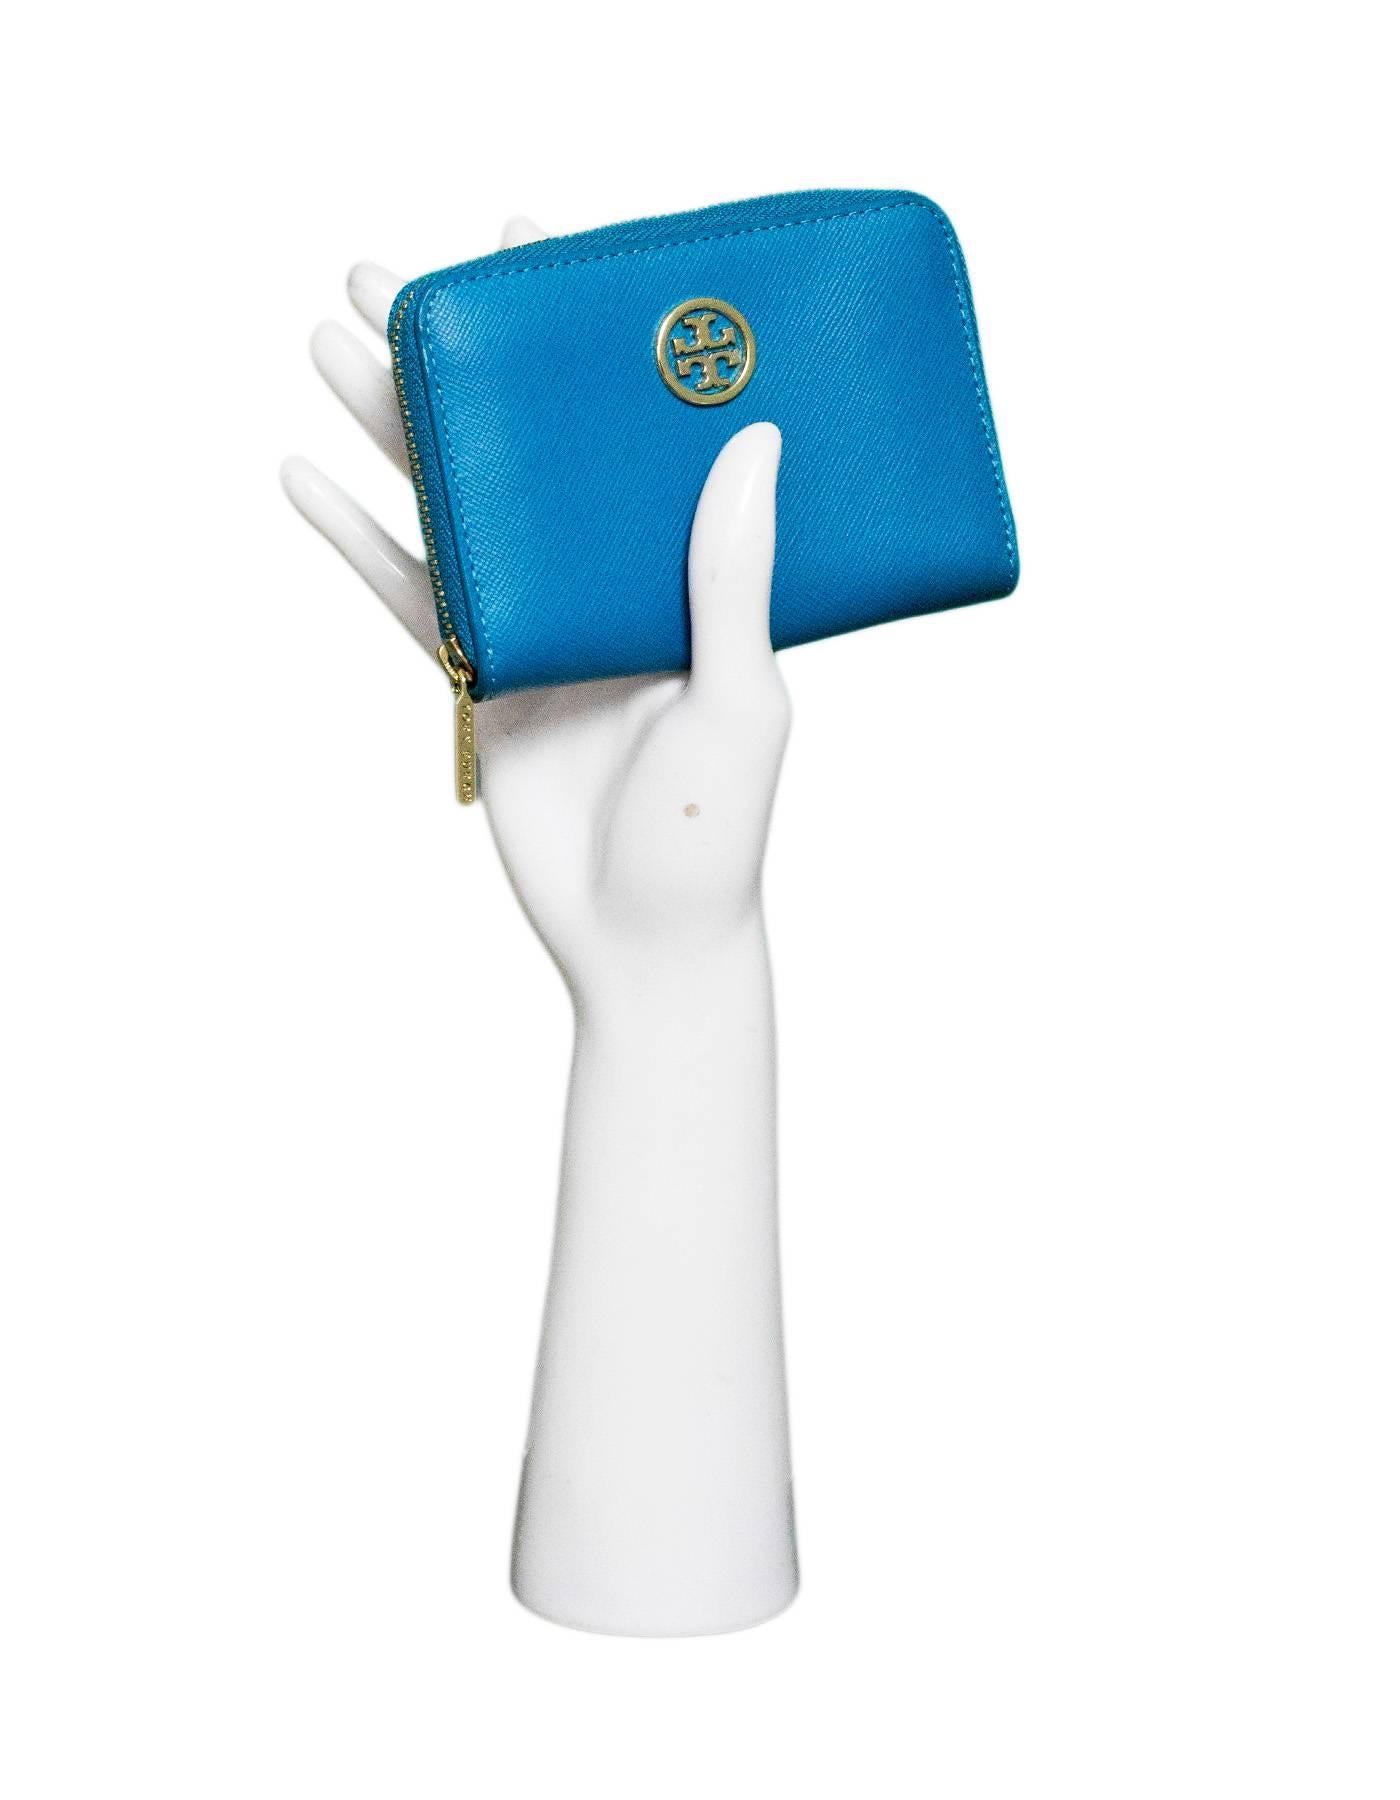 Tory Burch Blue Zip Around Coin Purse

Made In: China
Color: Blue
Materials: Leather, metal
Lining: Floral textile
Closure/Opening: Zip around closure
Exterior Pockets: None
Interior Pockets: Two compartments, two wall slots
Overall Condition: